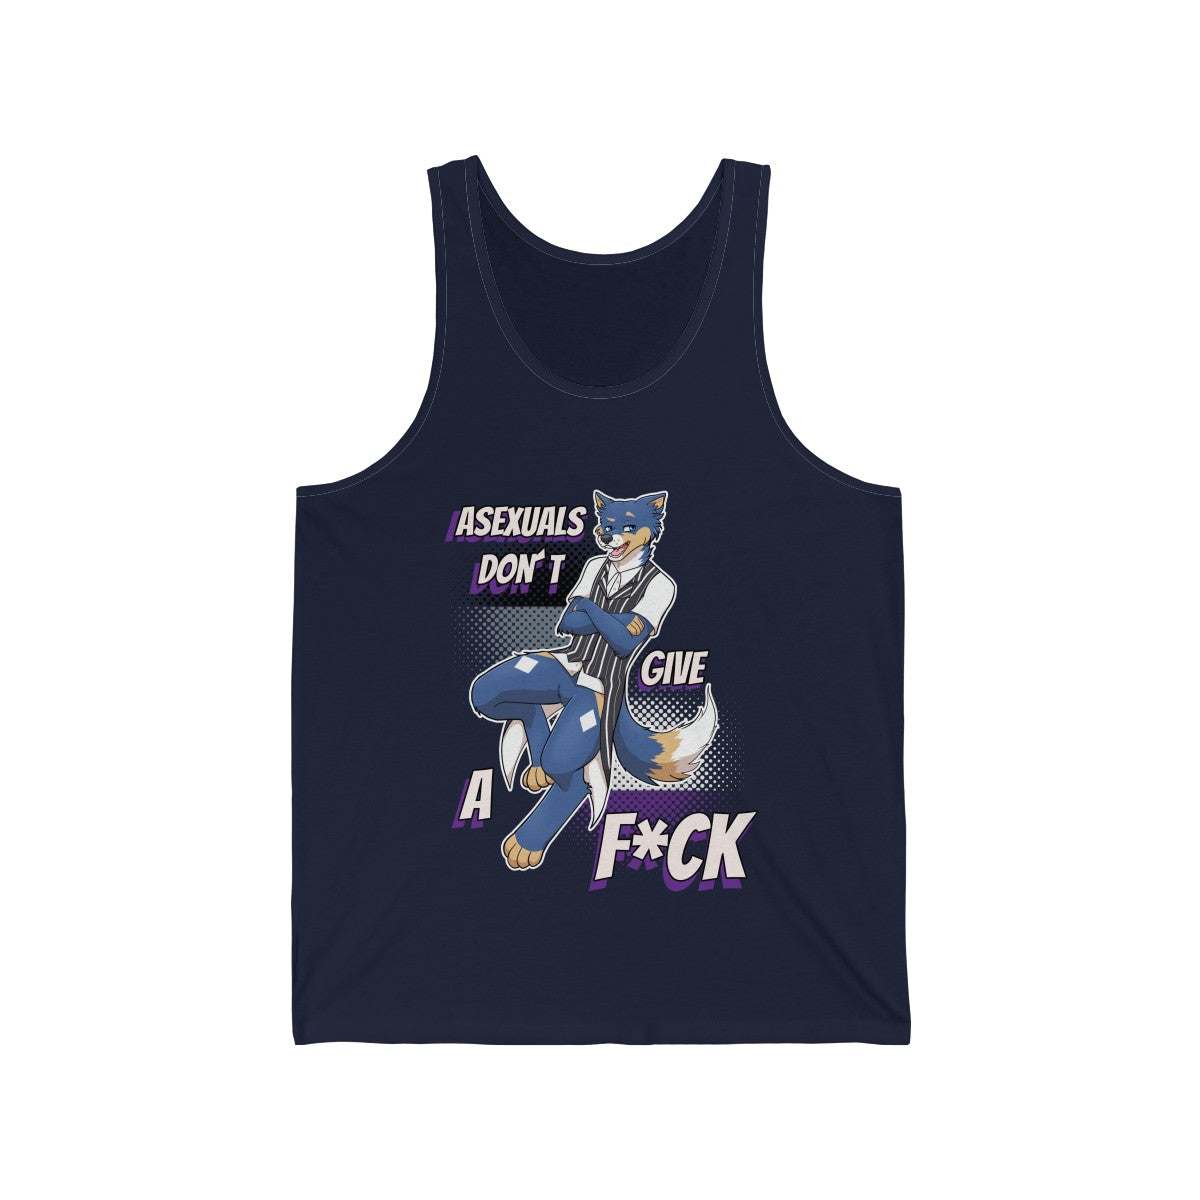 Asexual Don't Give A F*ck - Tank Top Tank Top Artemis Wishfoot Navy Blue XS 